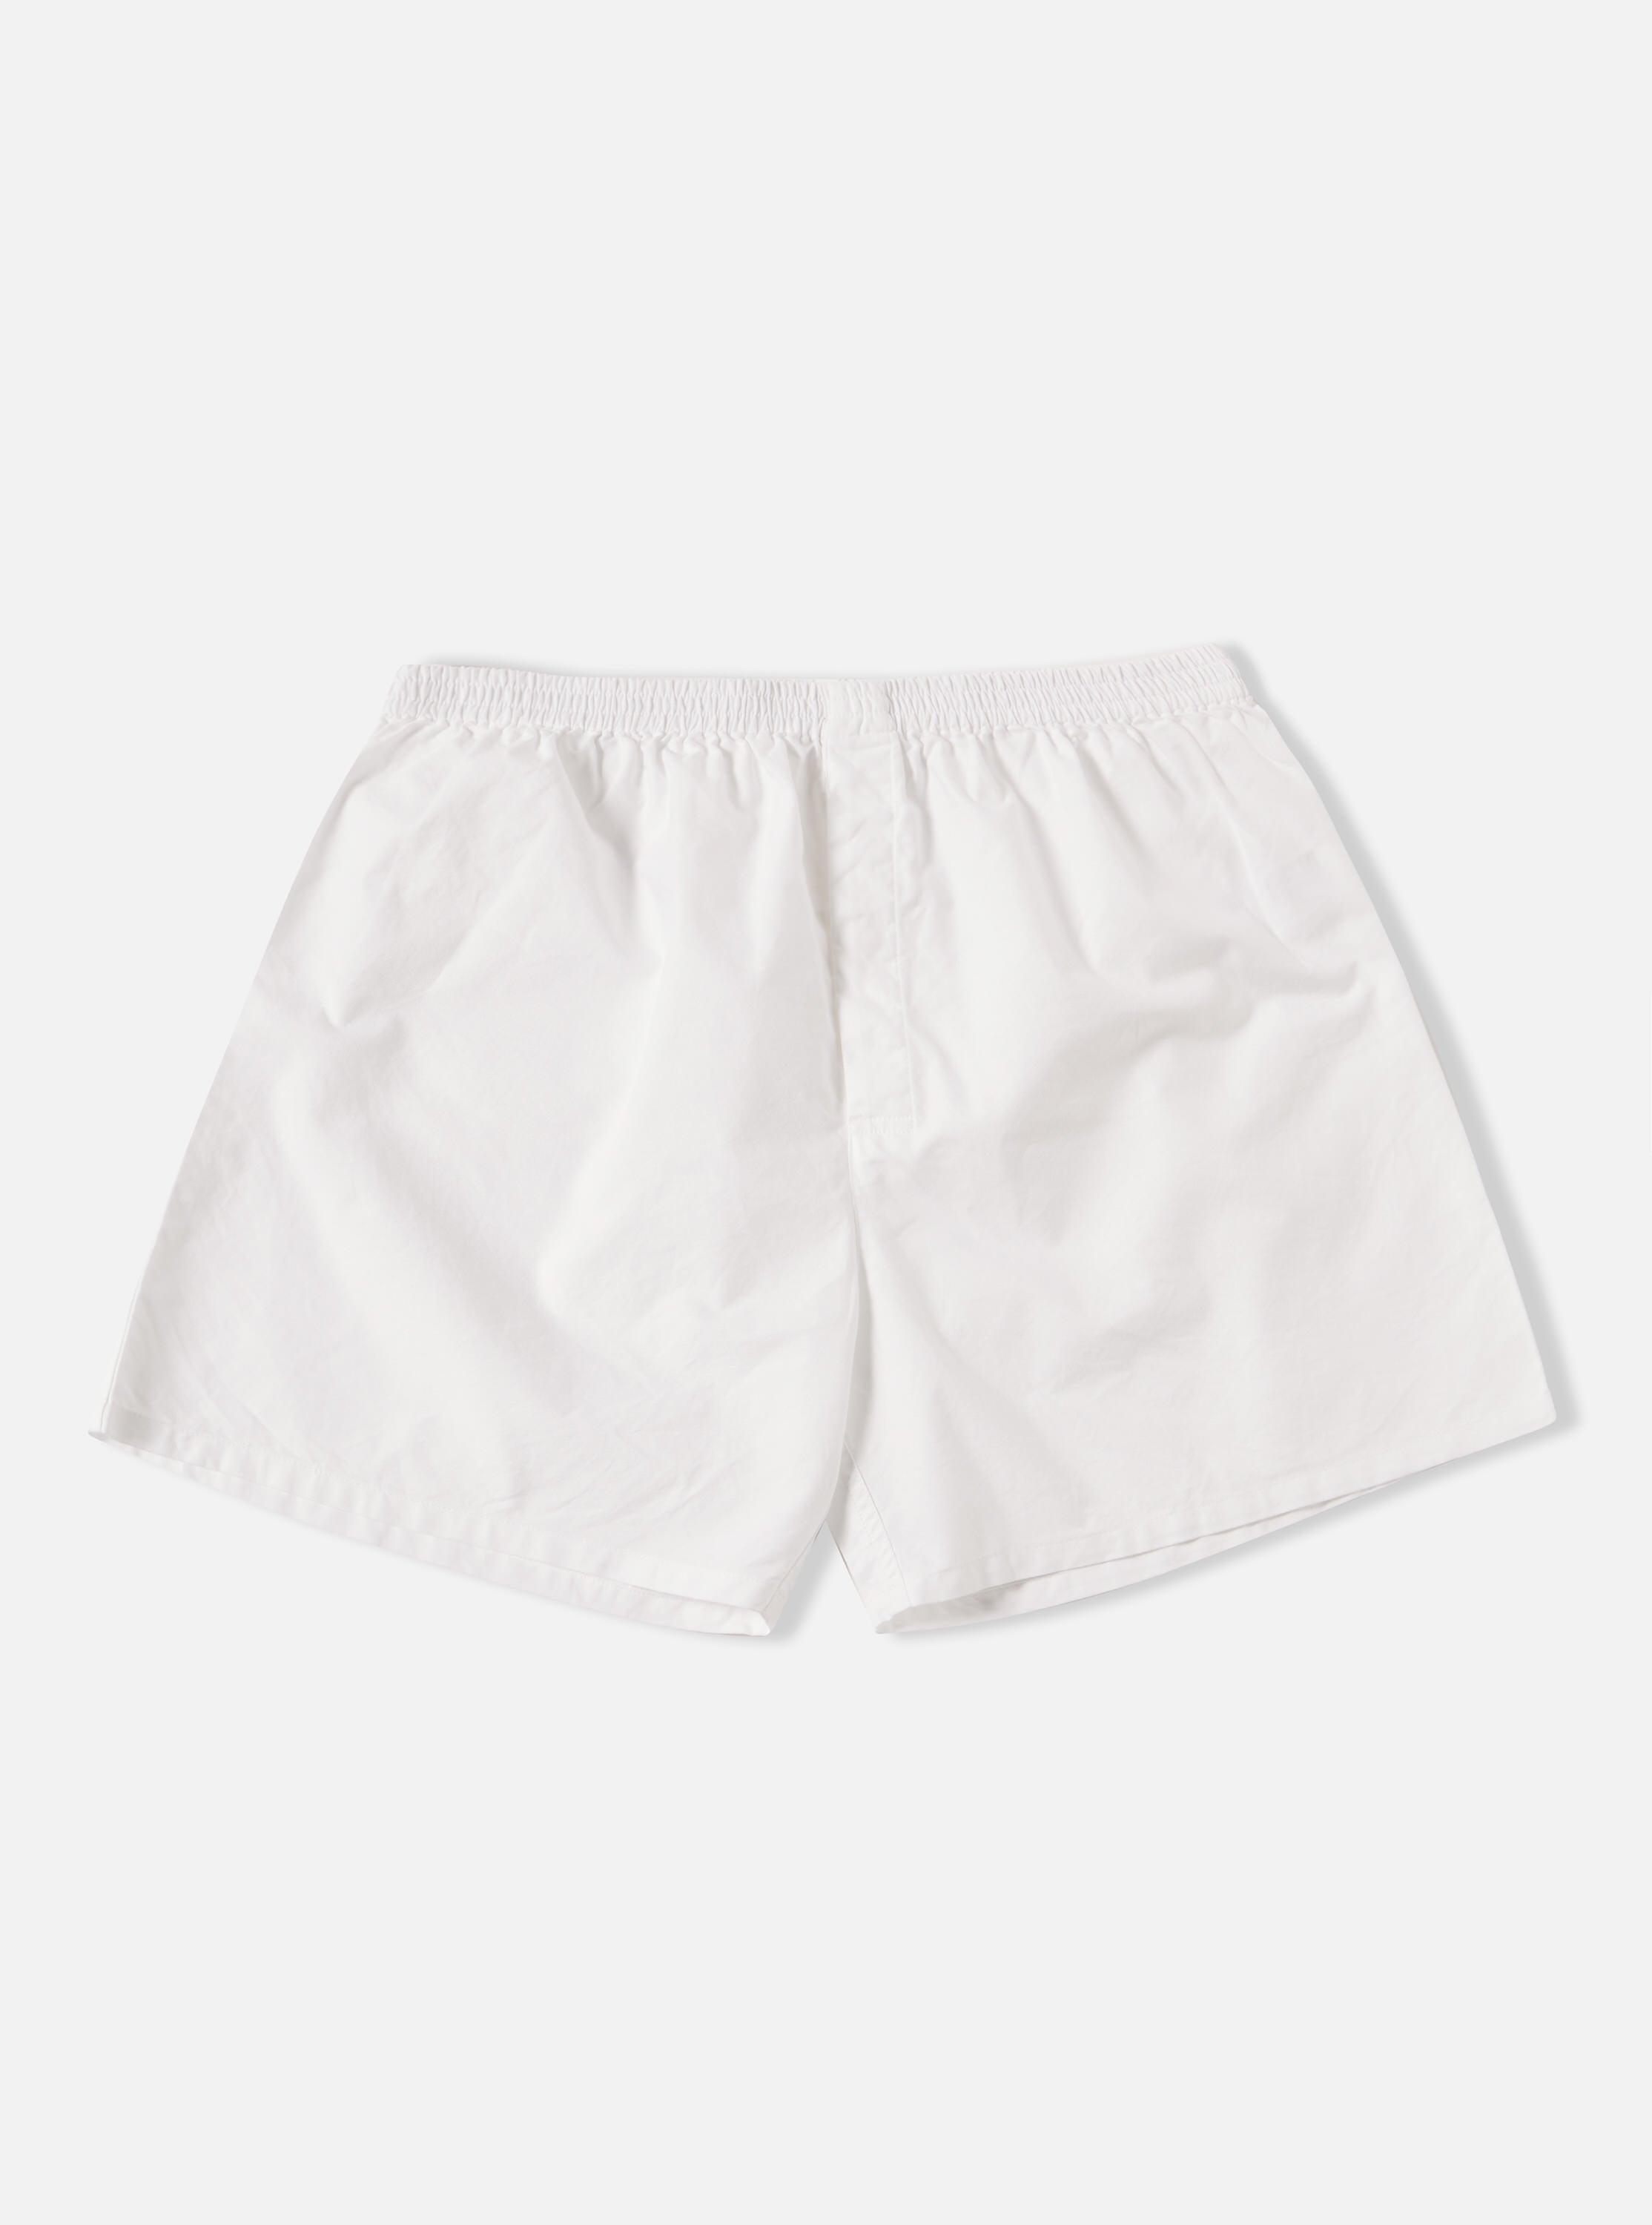 Universal Works Boxer Short in White Oxford Cotton